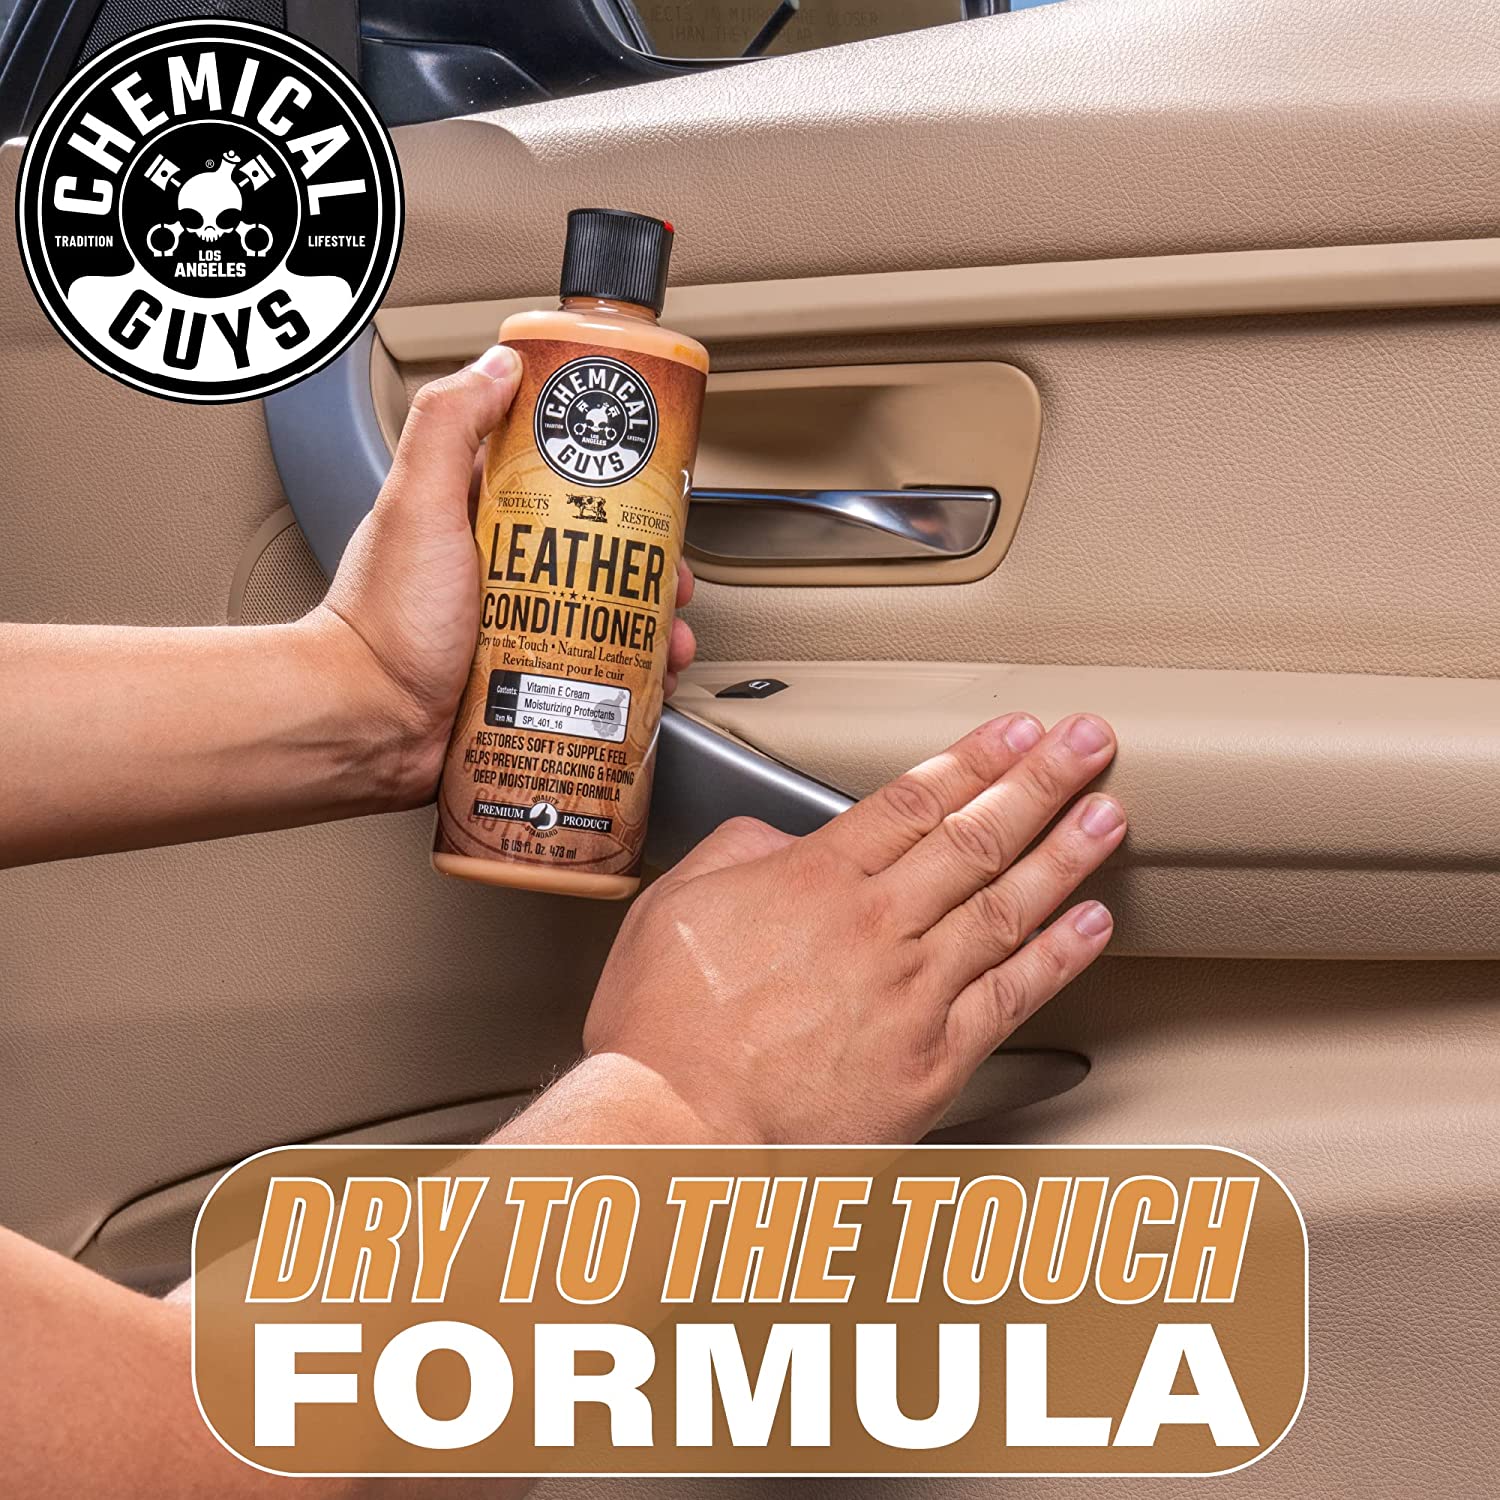 Chemical Guys SPI_401 Leather Conditioner, 16 Oz - image 5 of 11